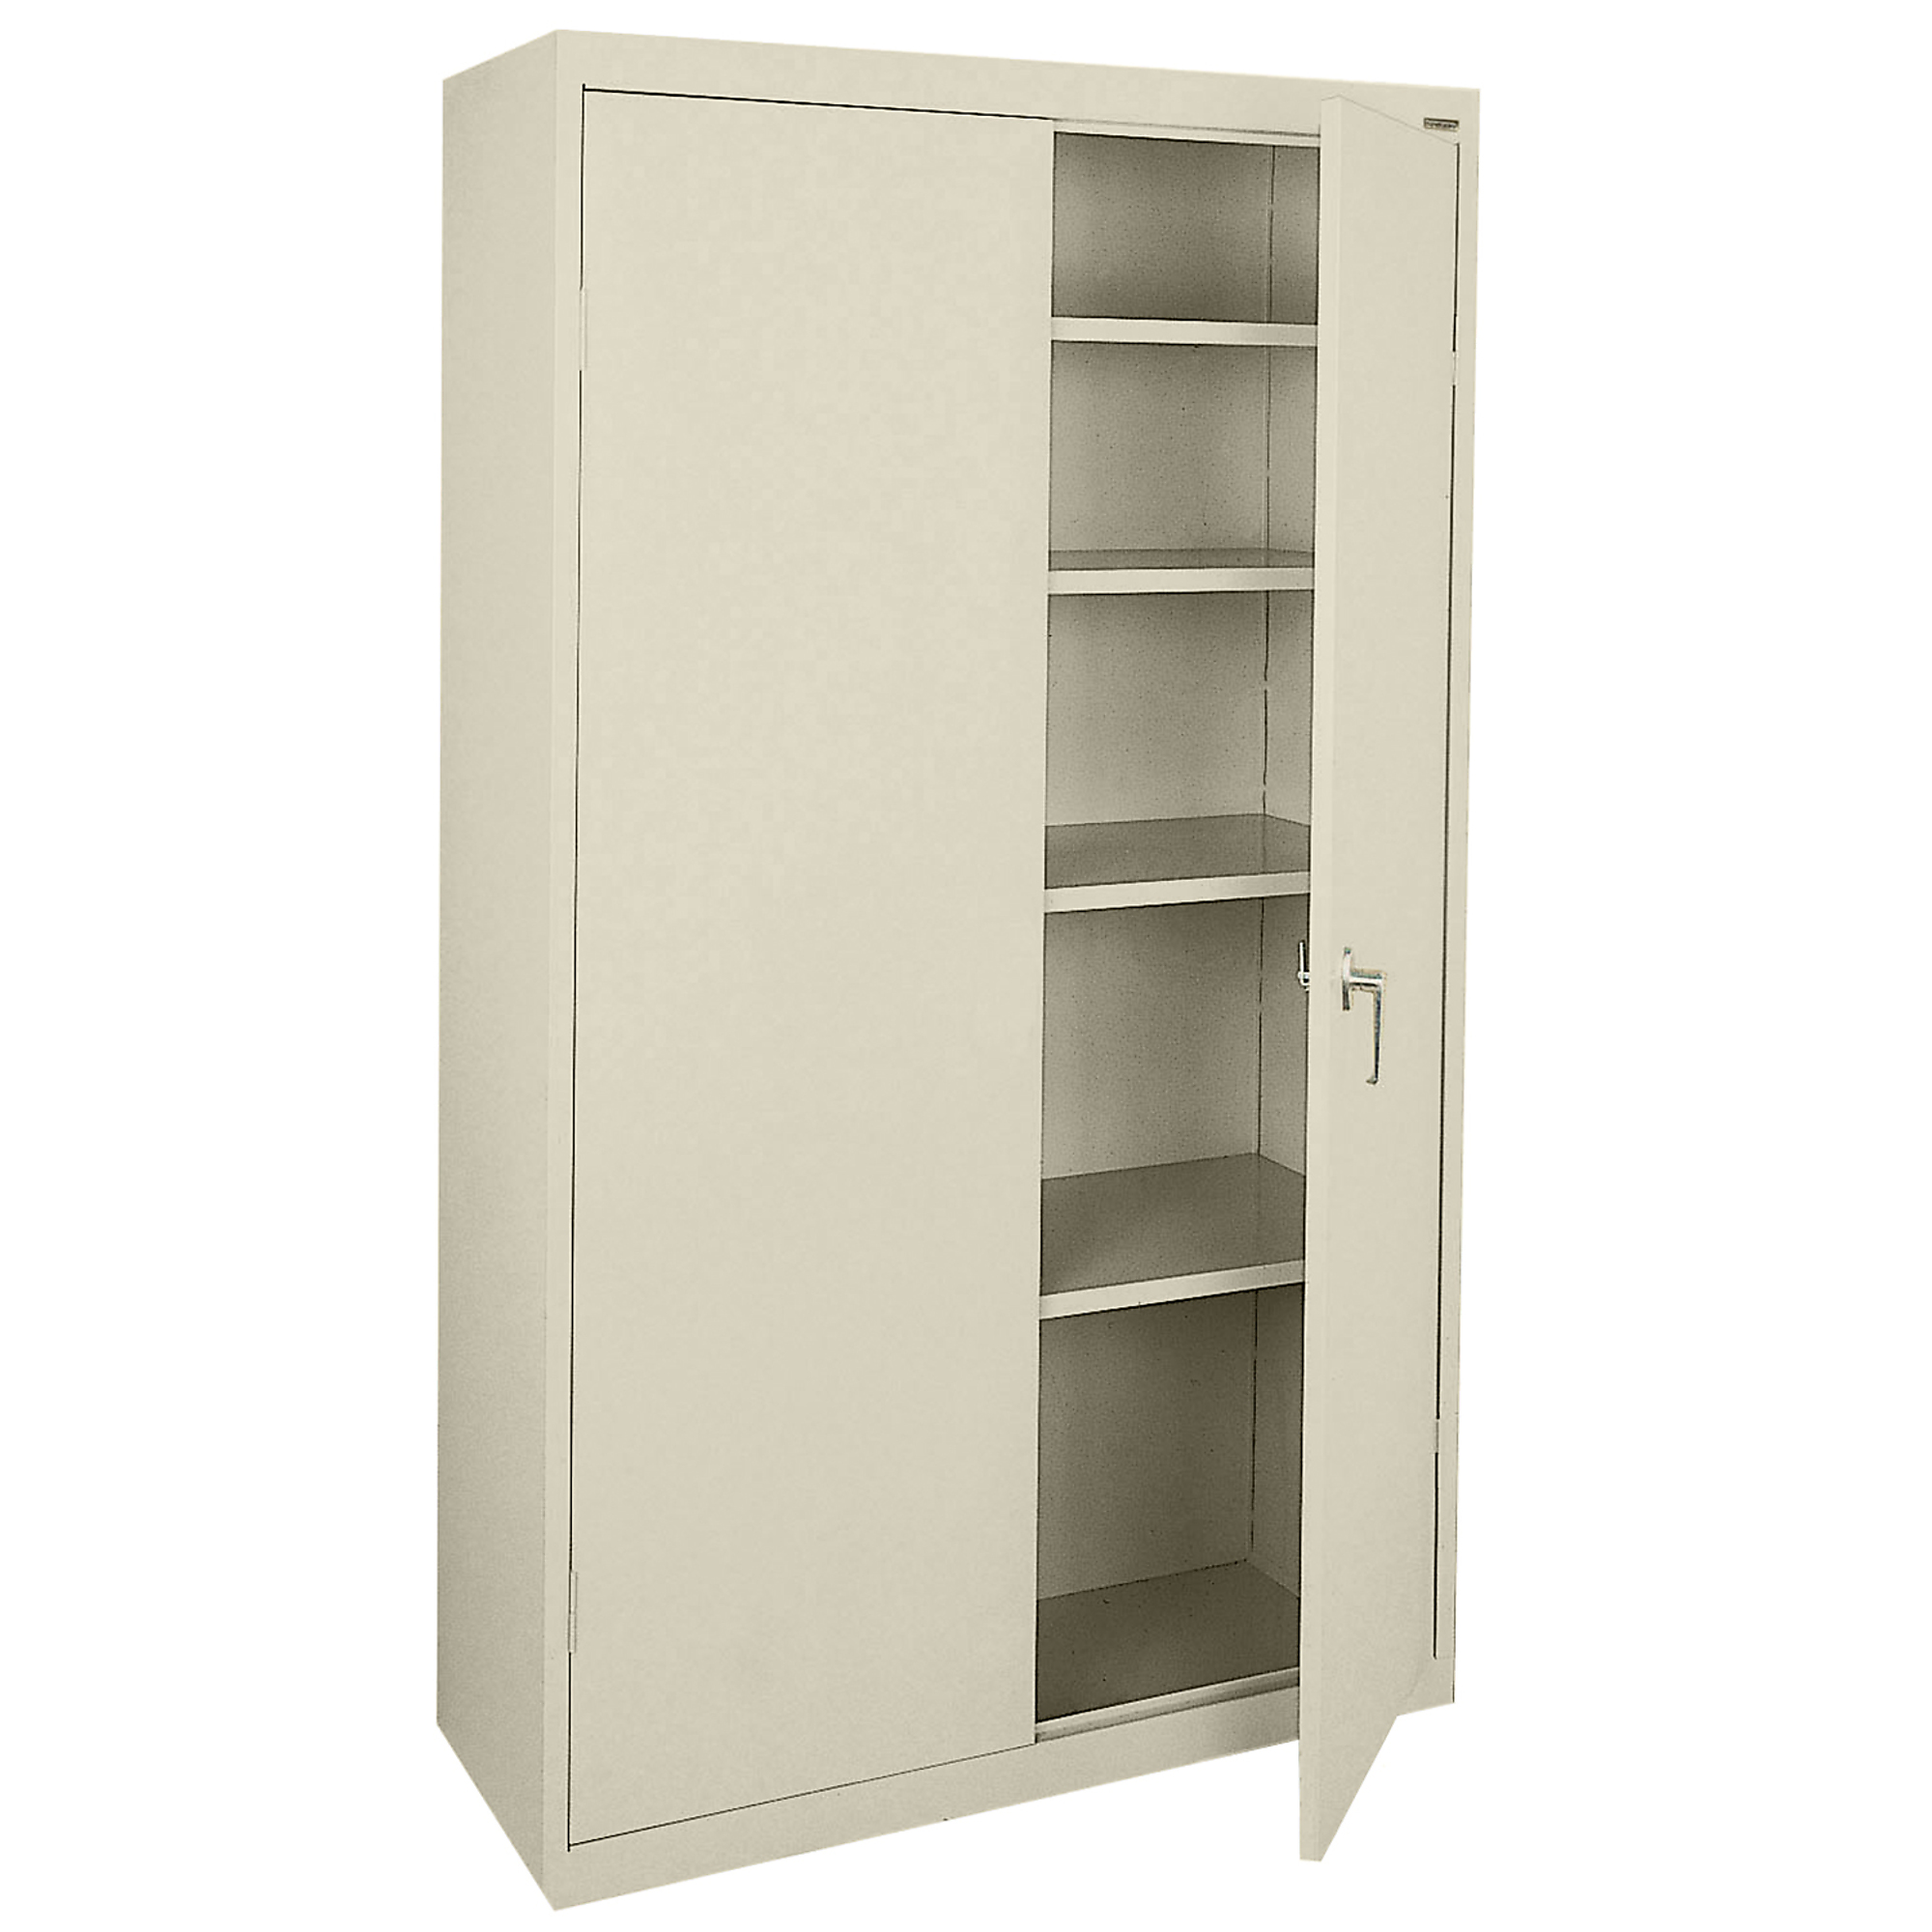 Sandusky Lee Sandusky, Value Line Cabinet 36x18x72 Putty, Height 72 in, Width 36 in, Color Putty, Model VF41361872-07